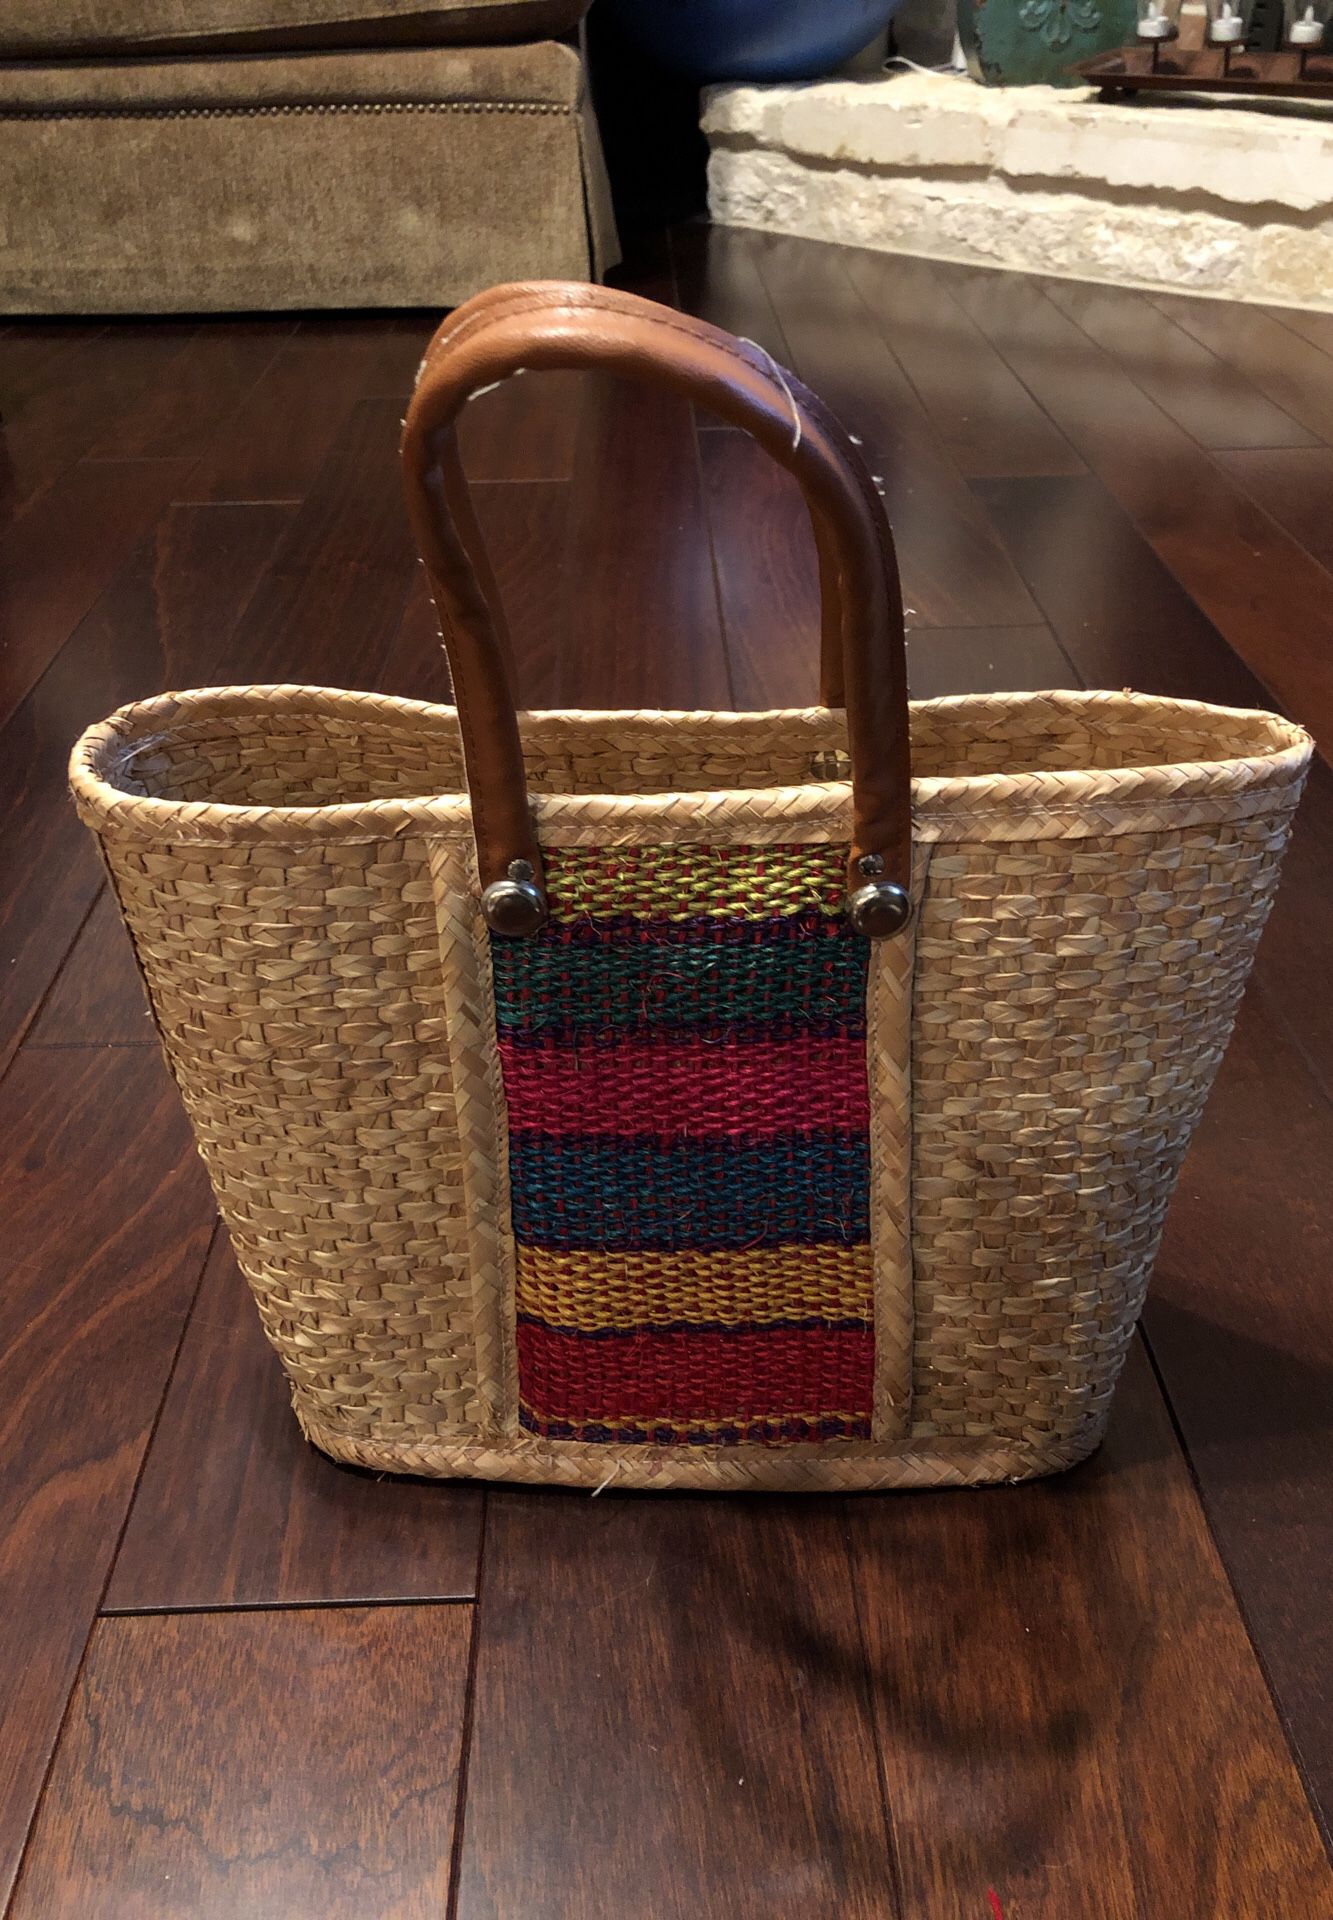 Decorative straw bag - nice for pool or beach